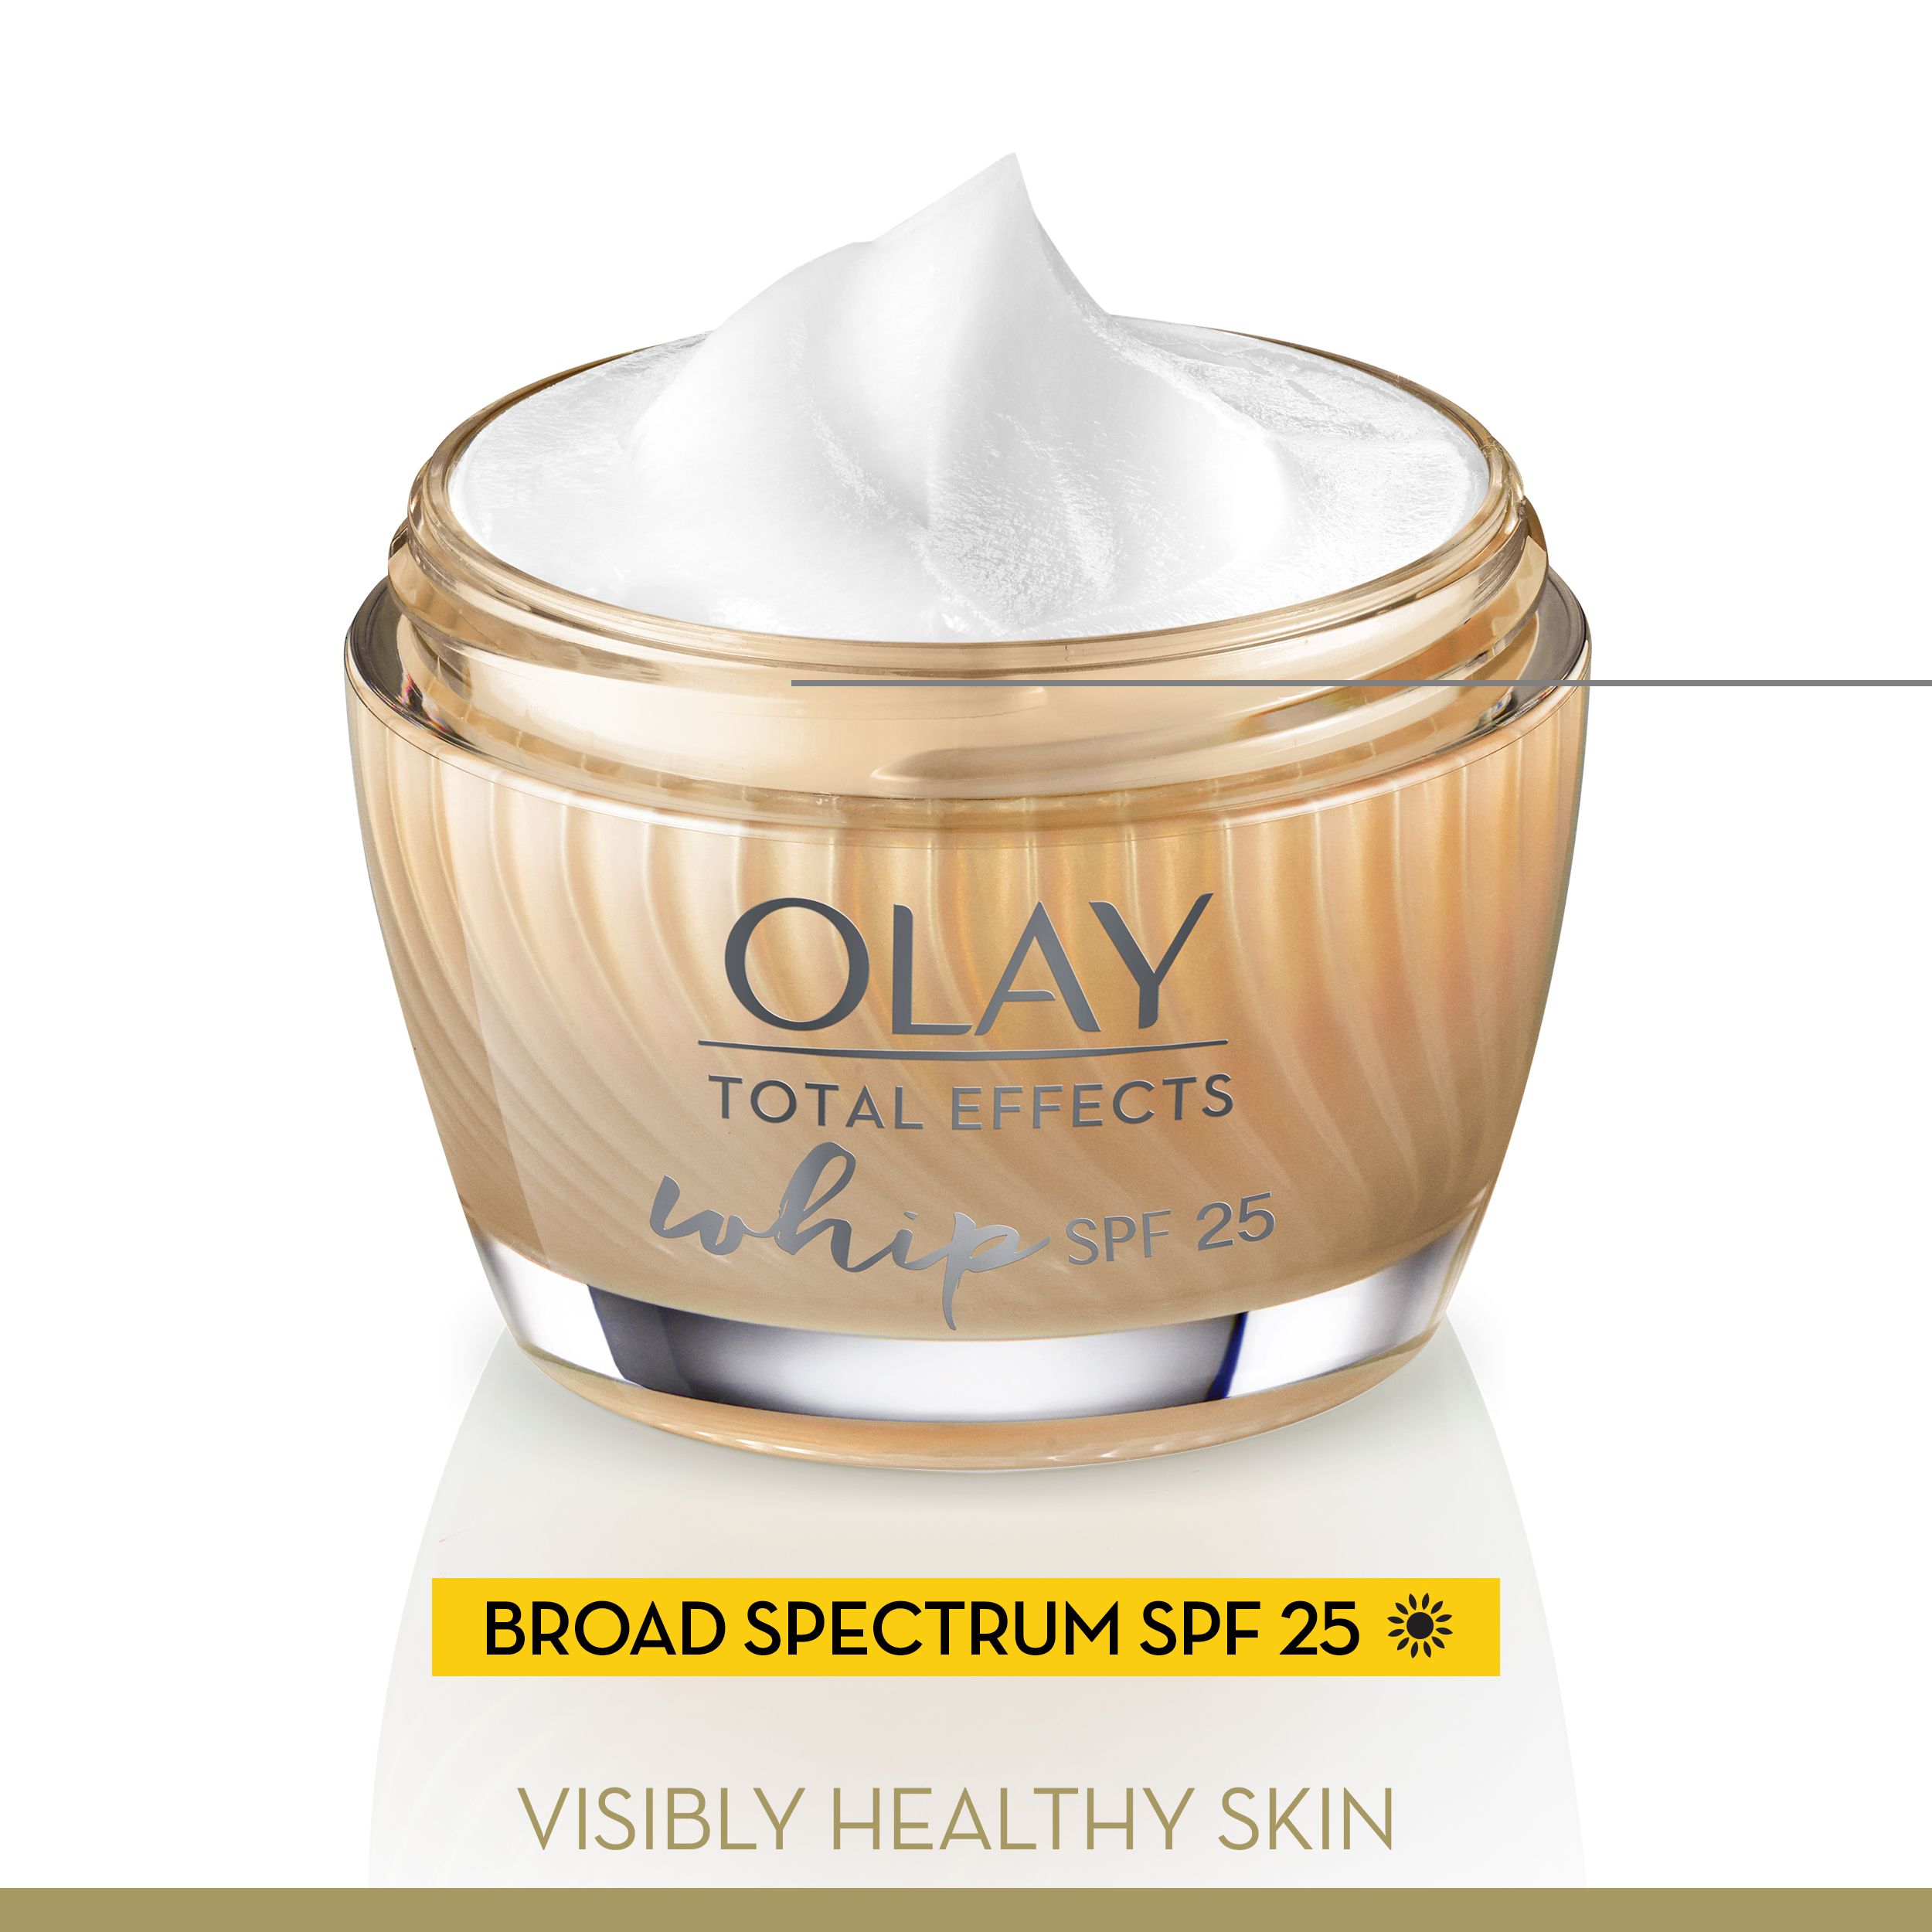 Olay Total Effects Whip Face Moisturizer SPF 25, 1.7 oz - image 5 of 11